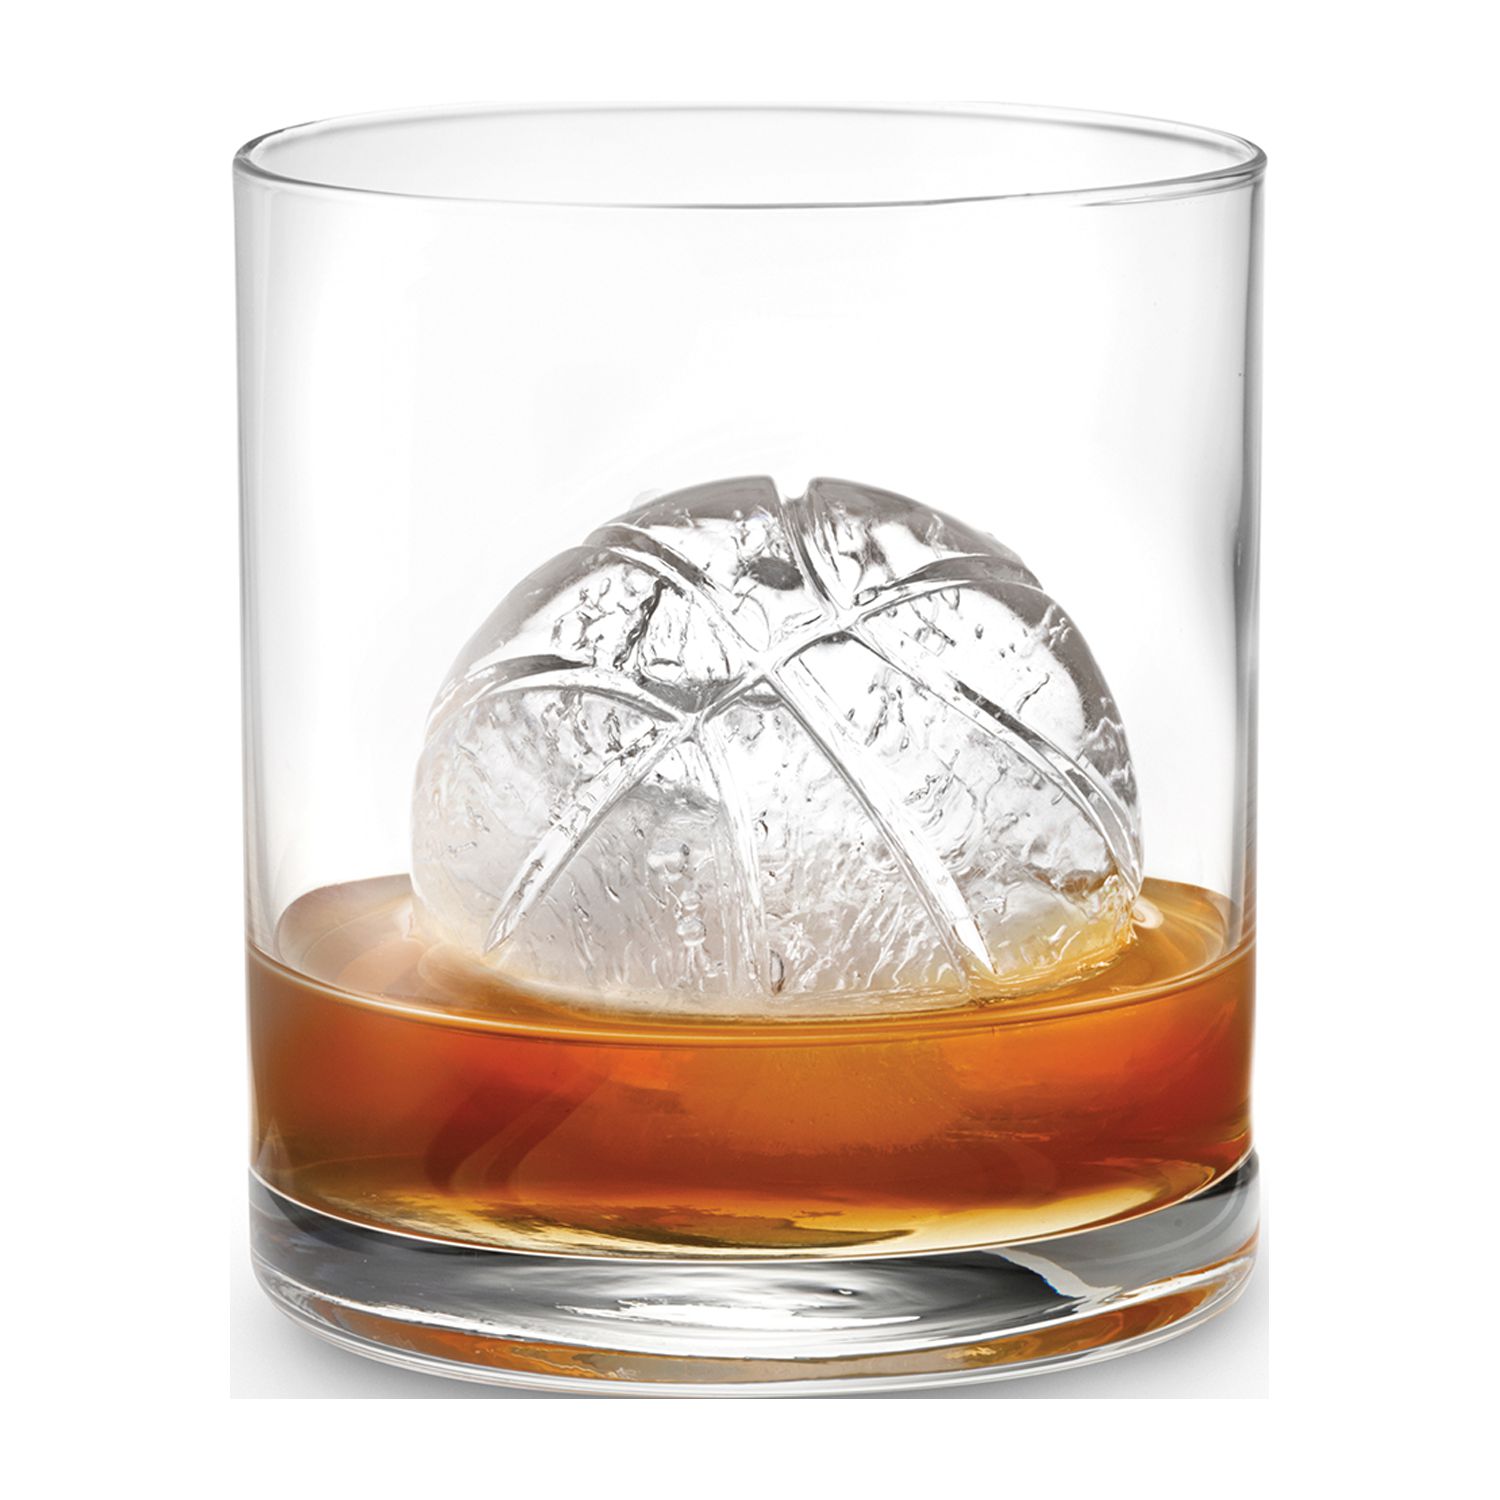 Tovolo Silicone Ice Mold, Basketball Large Ice Molds for Cocktail Drinks, 2 Pack - image 5 of 8